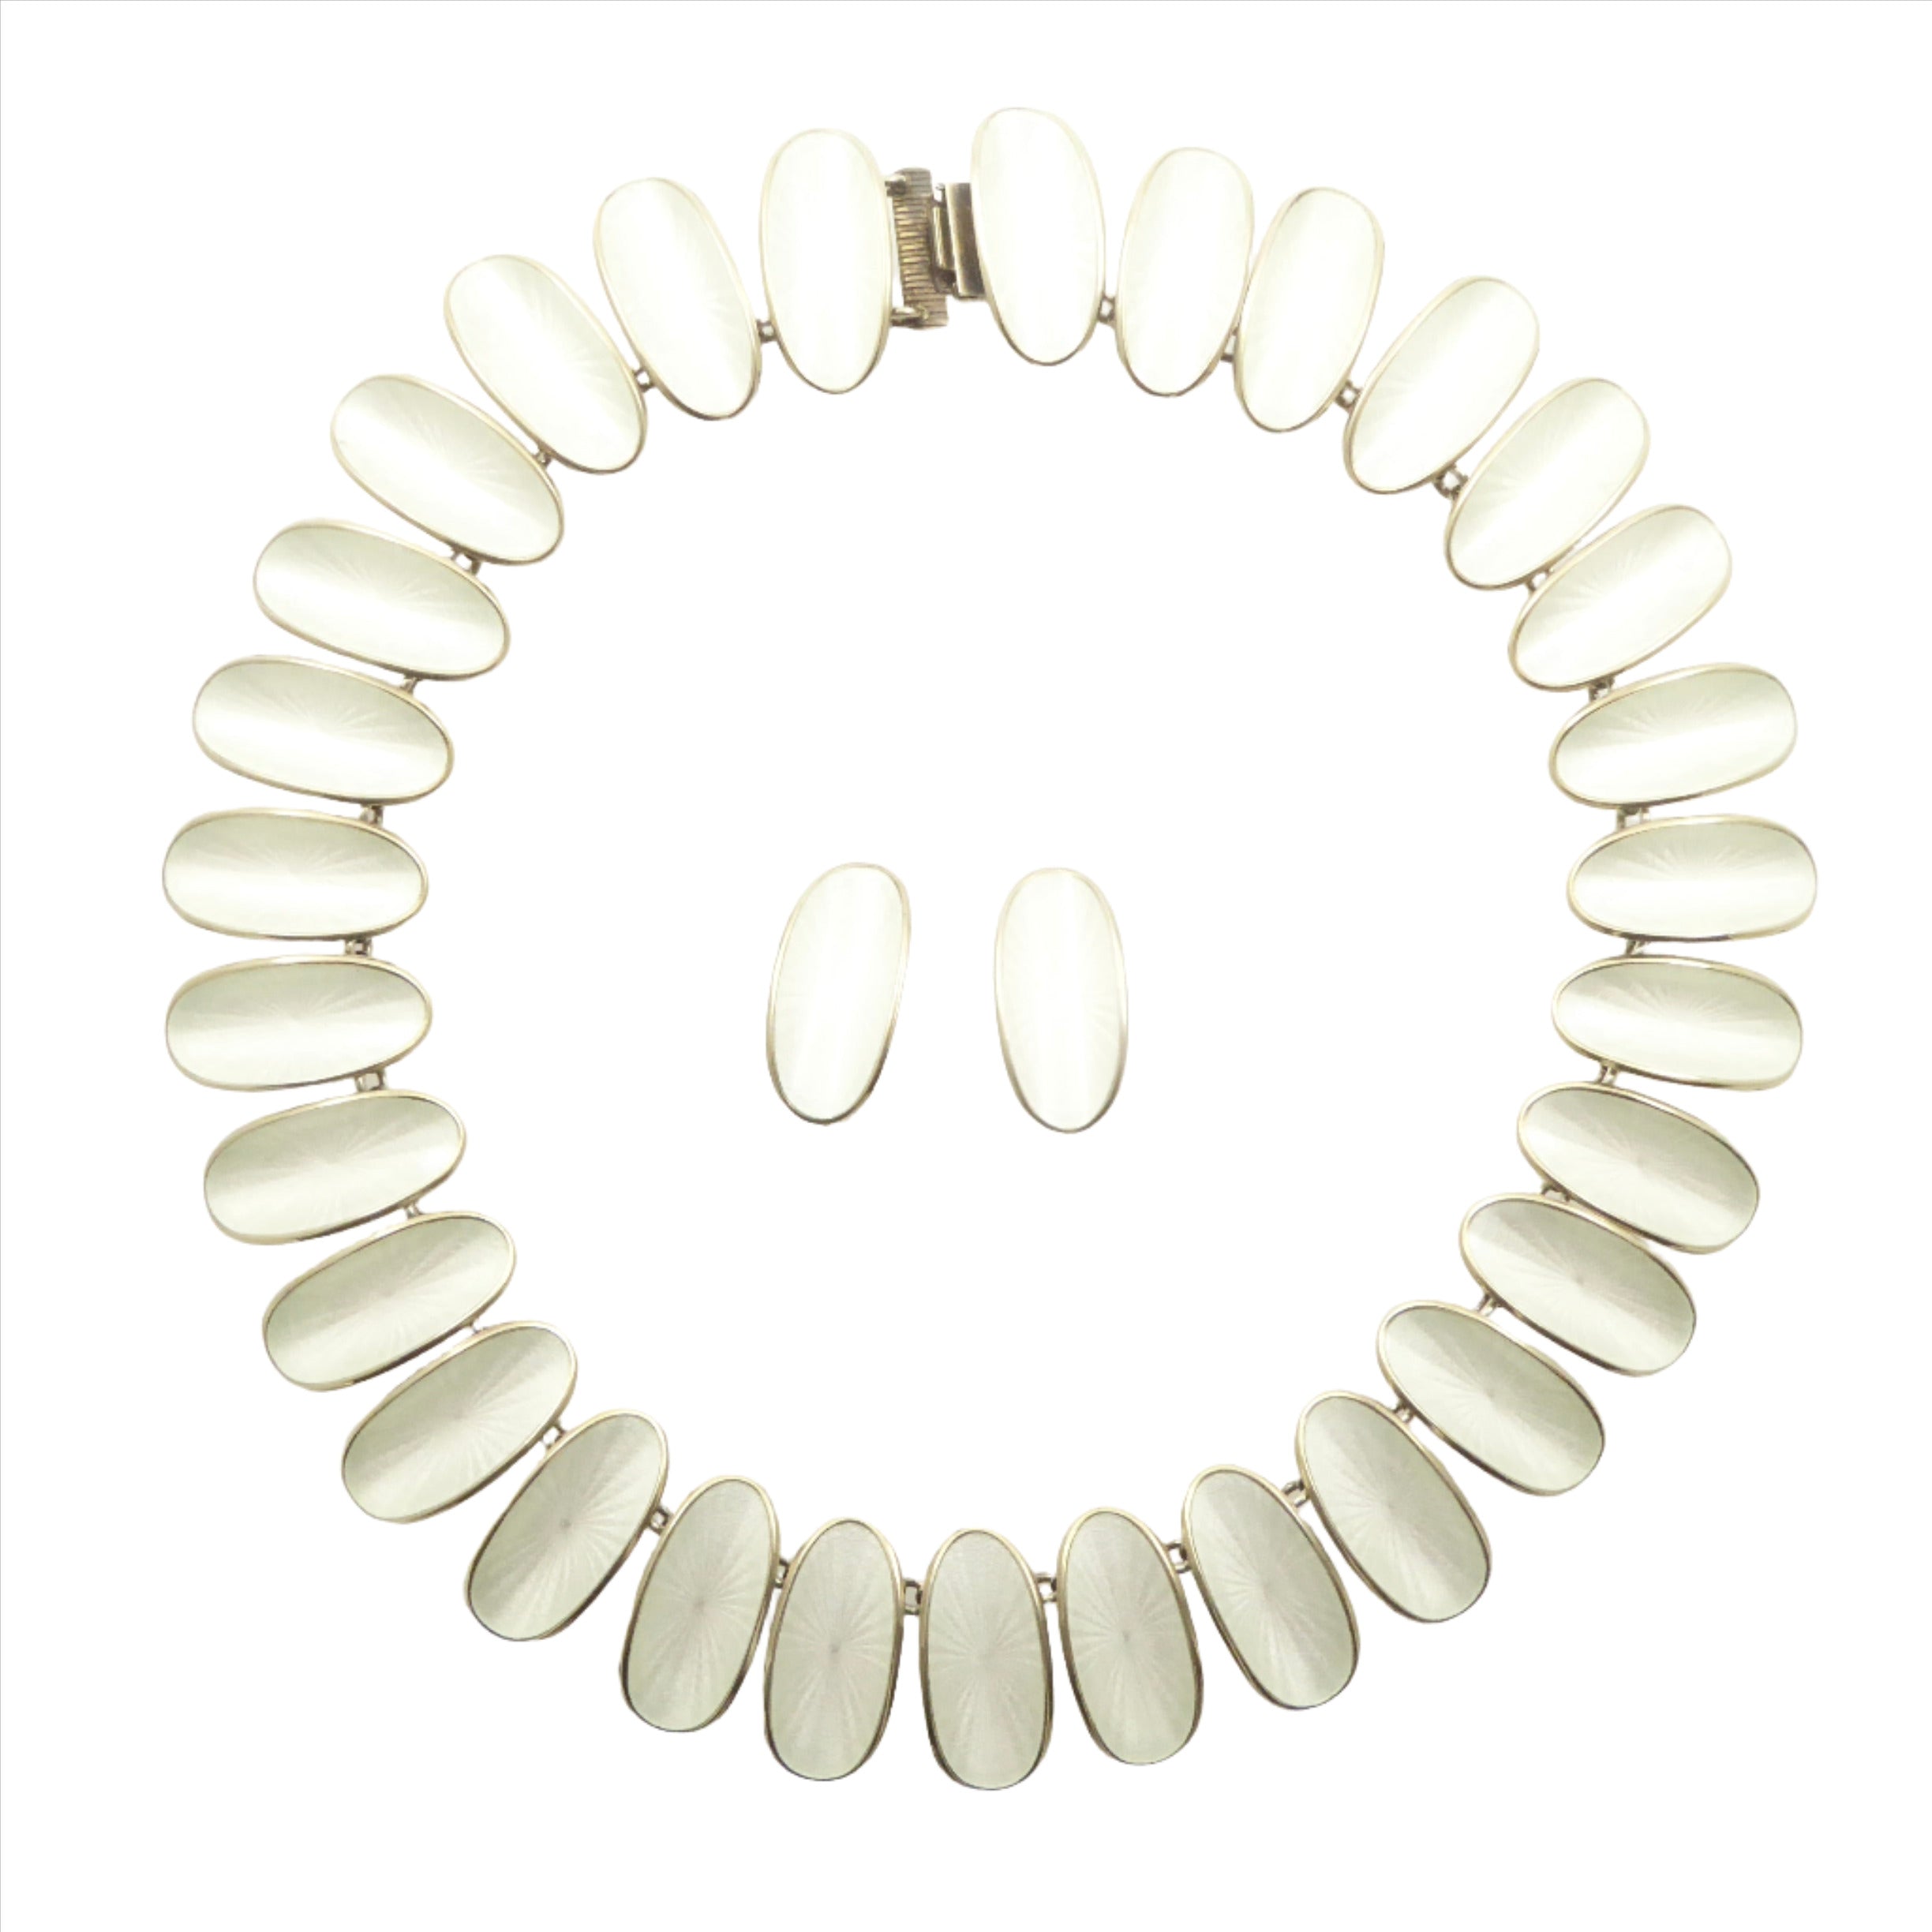 David-Andersen White Enamel Necklace and Earrings Designed by Willy Winnaess